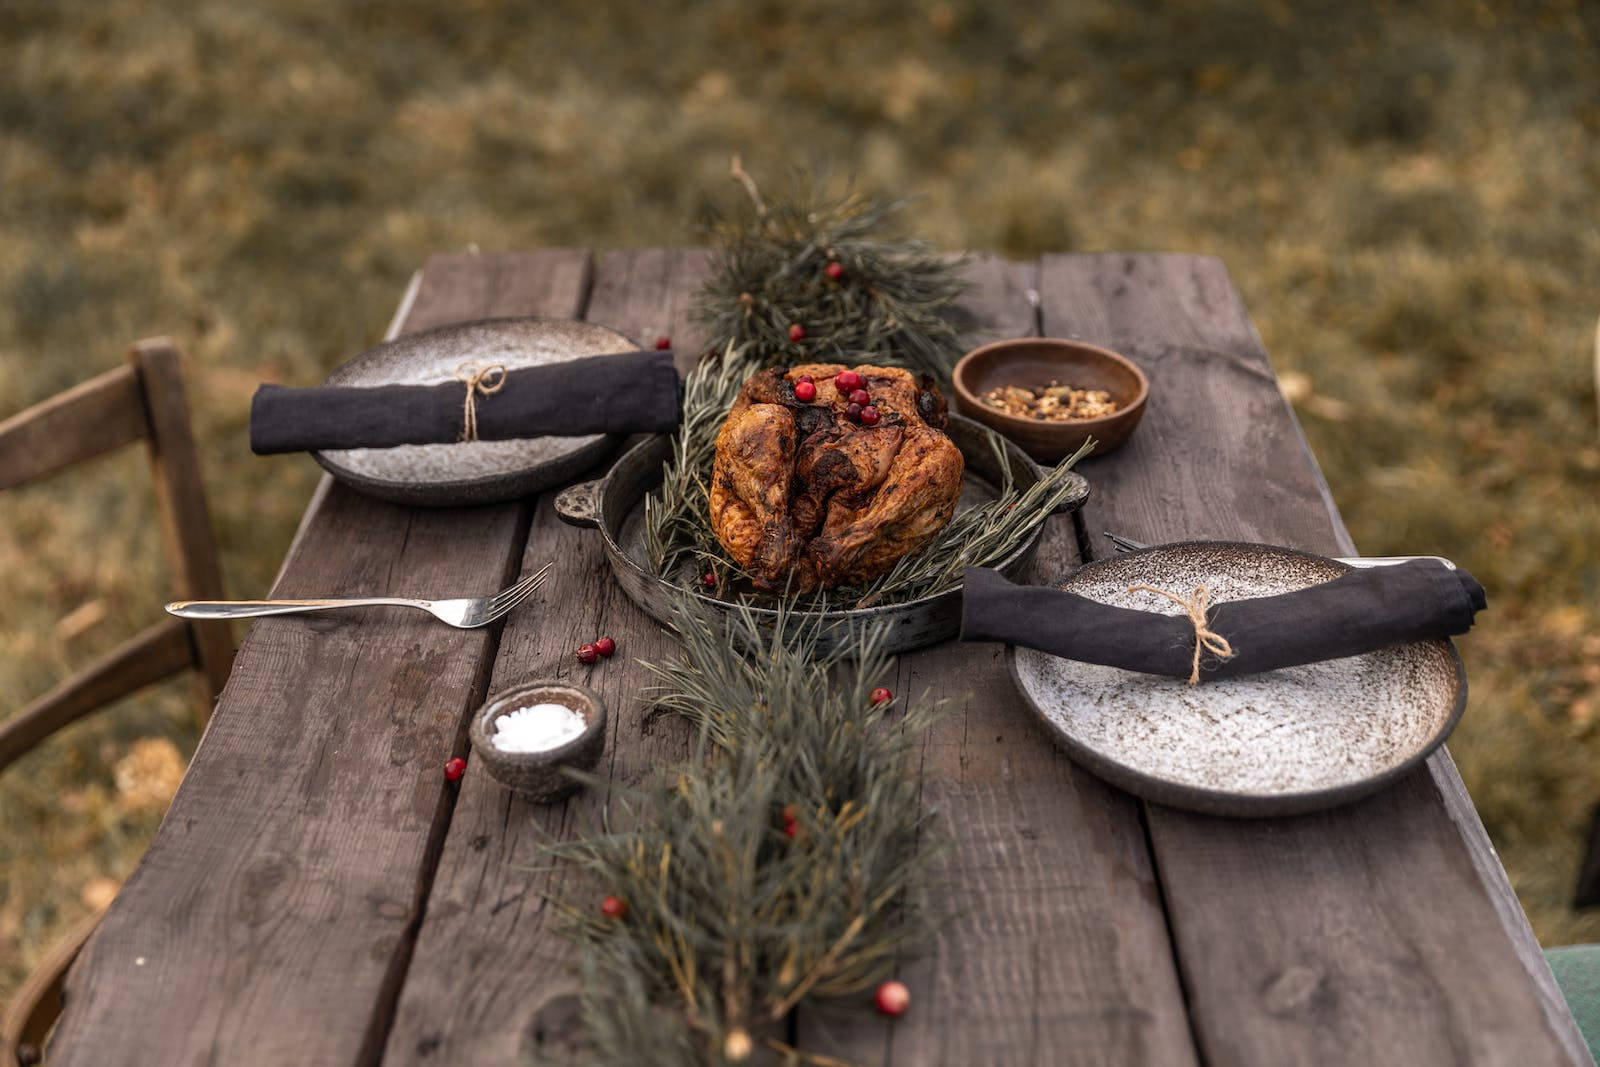 Rustic Thanksgiving Day Table Set Up Background